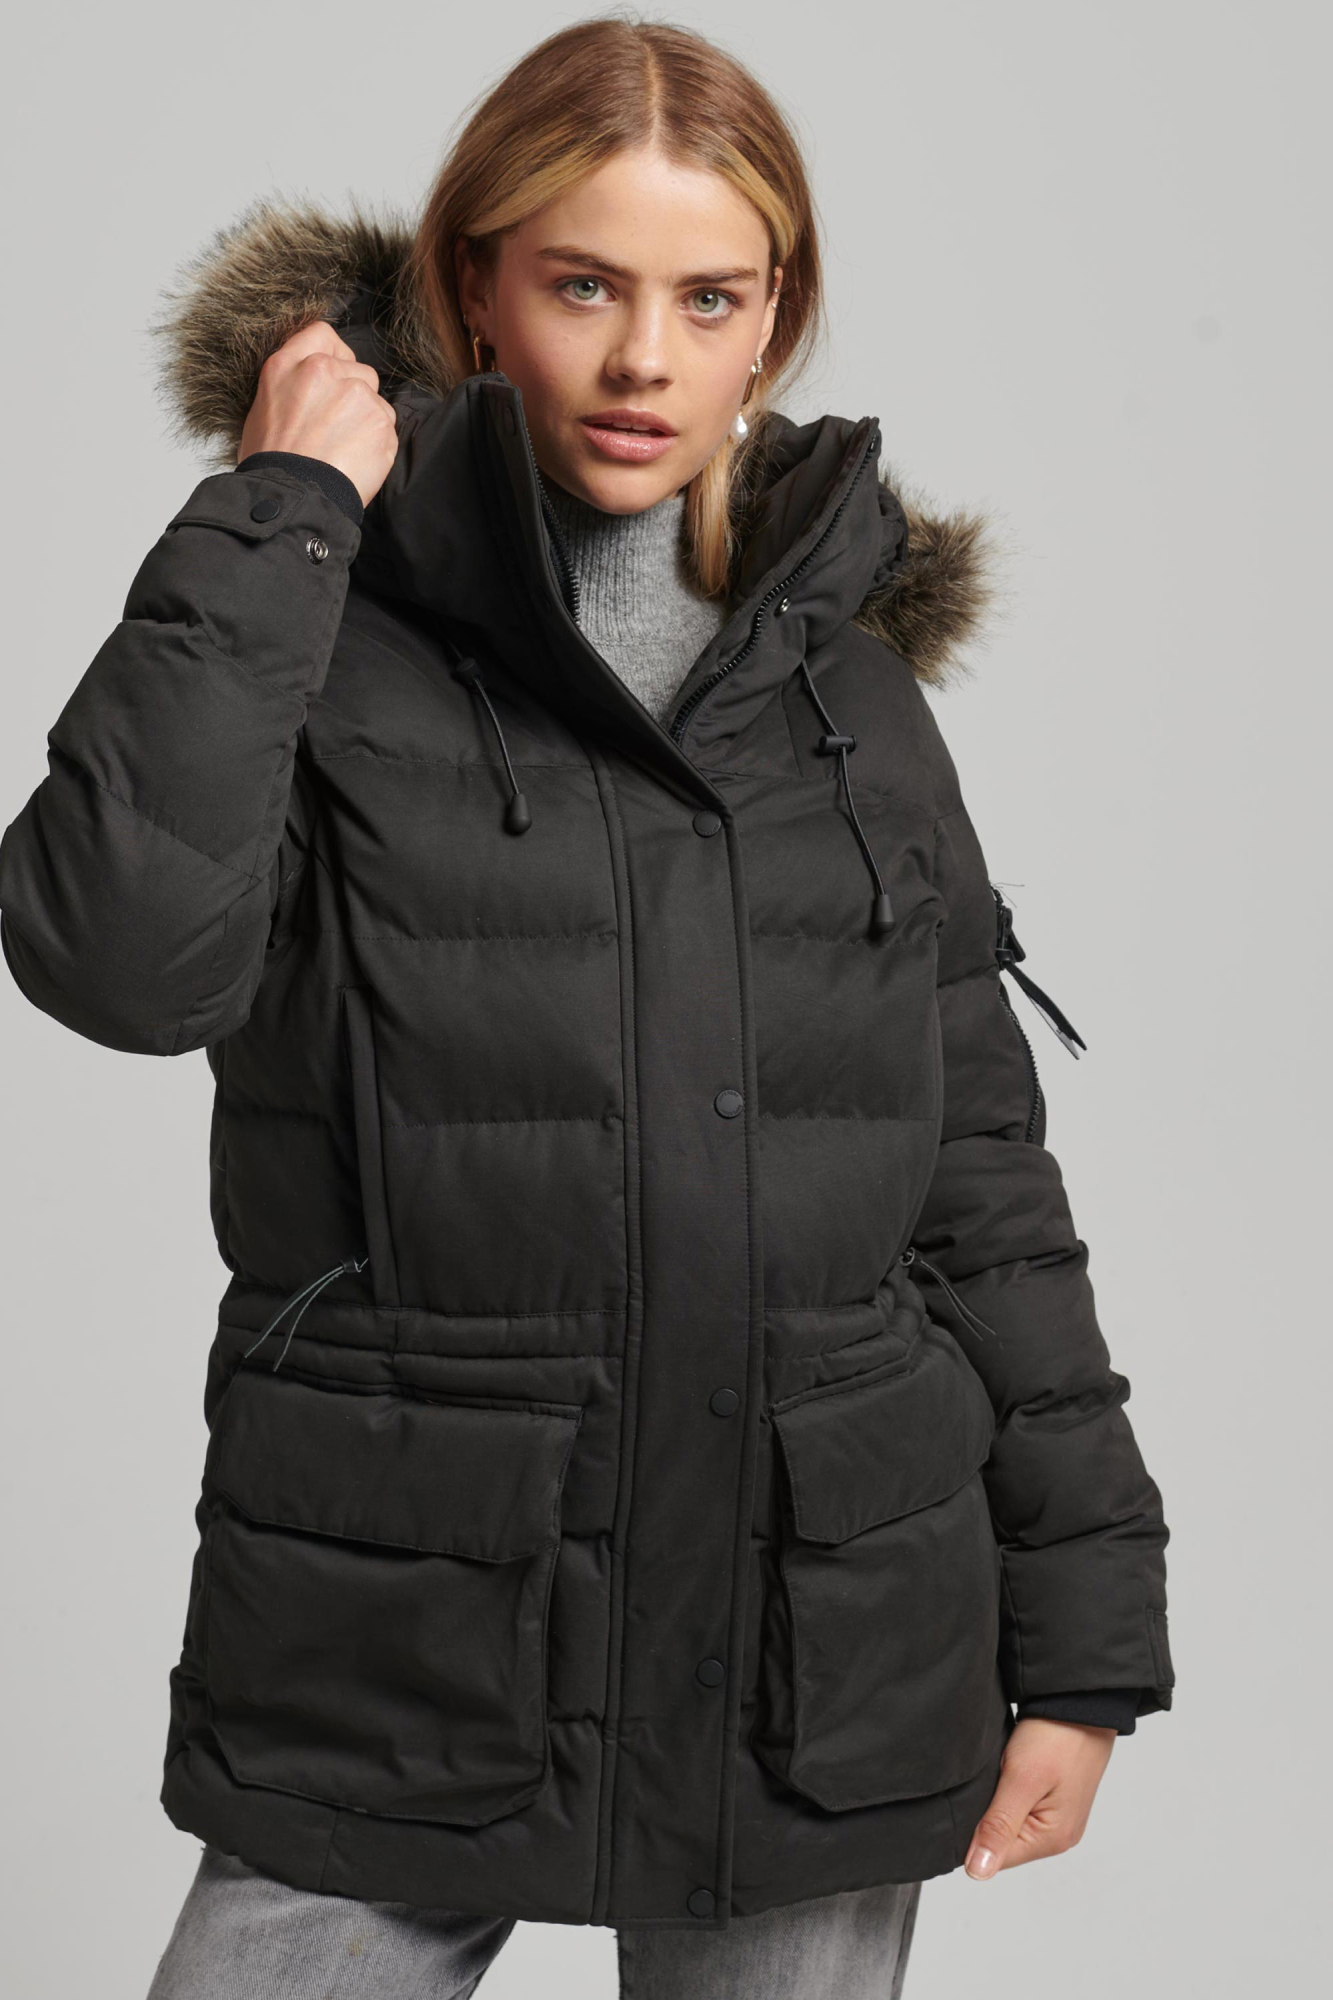 Superdry Womens Microfibre Expedition Parka Black - Size: 10